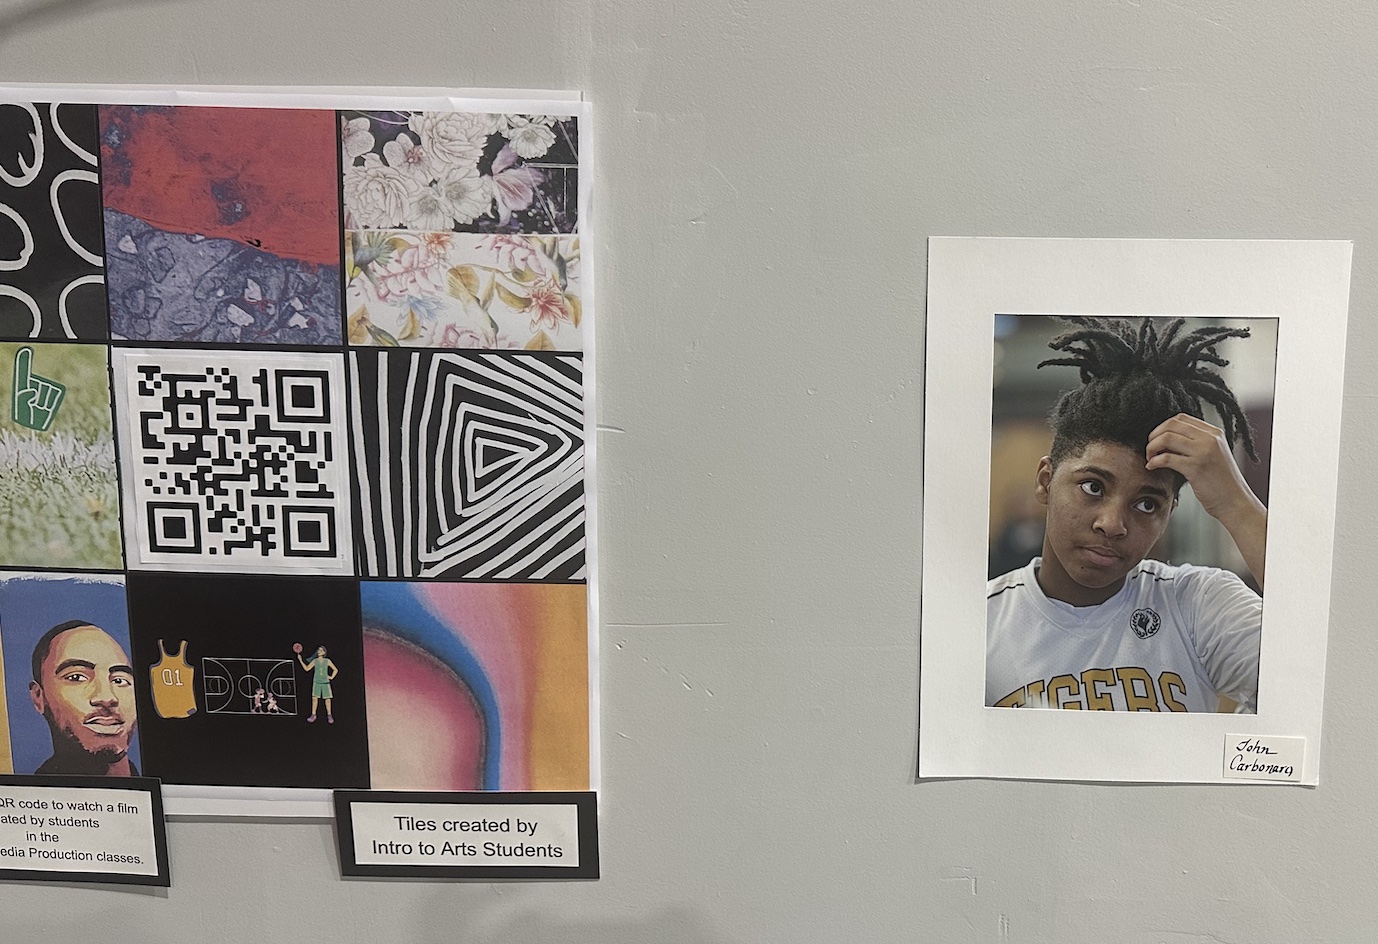 Artworks by two KCAPA students. On the left, is an piece of various artstyles laid in a 3 x 3 grid, like a tile. In the middle tile, is a QR code that links to a video. On the right is a photograph of a young black individual by a different student.